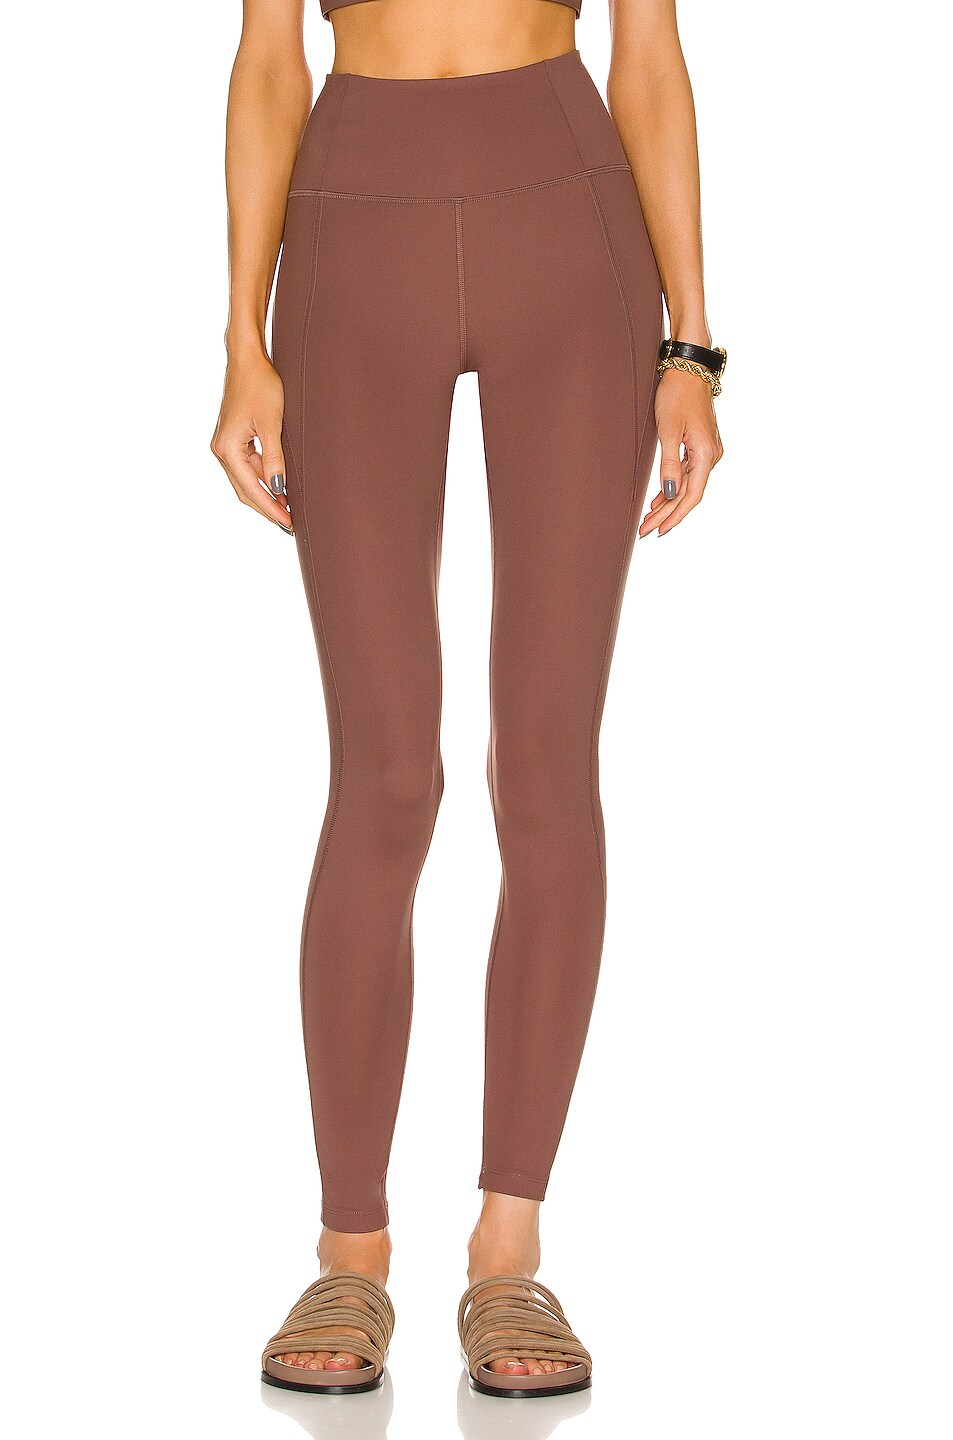 Image 1 of Girlfriend Collective High-Rise Compressive Legging in Storm